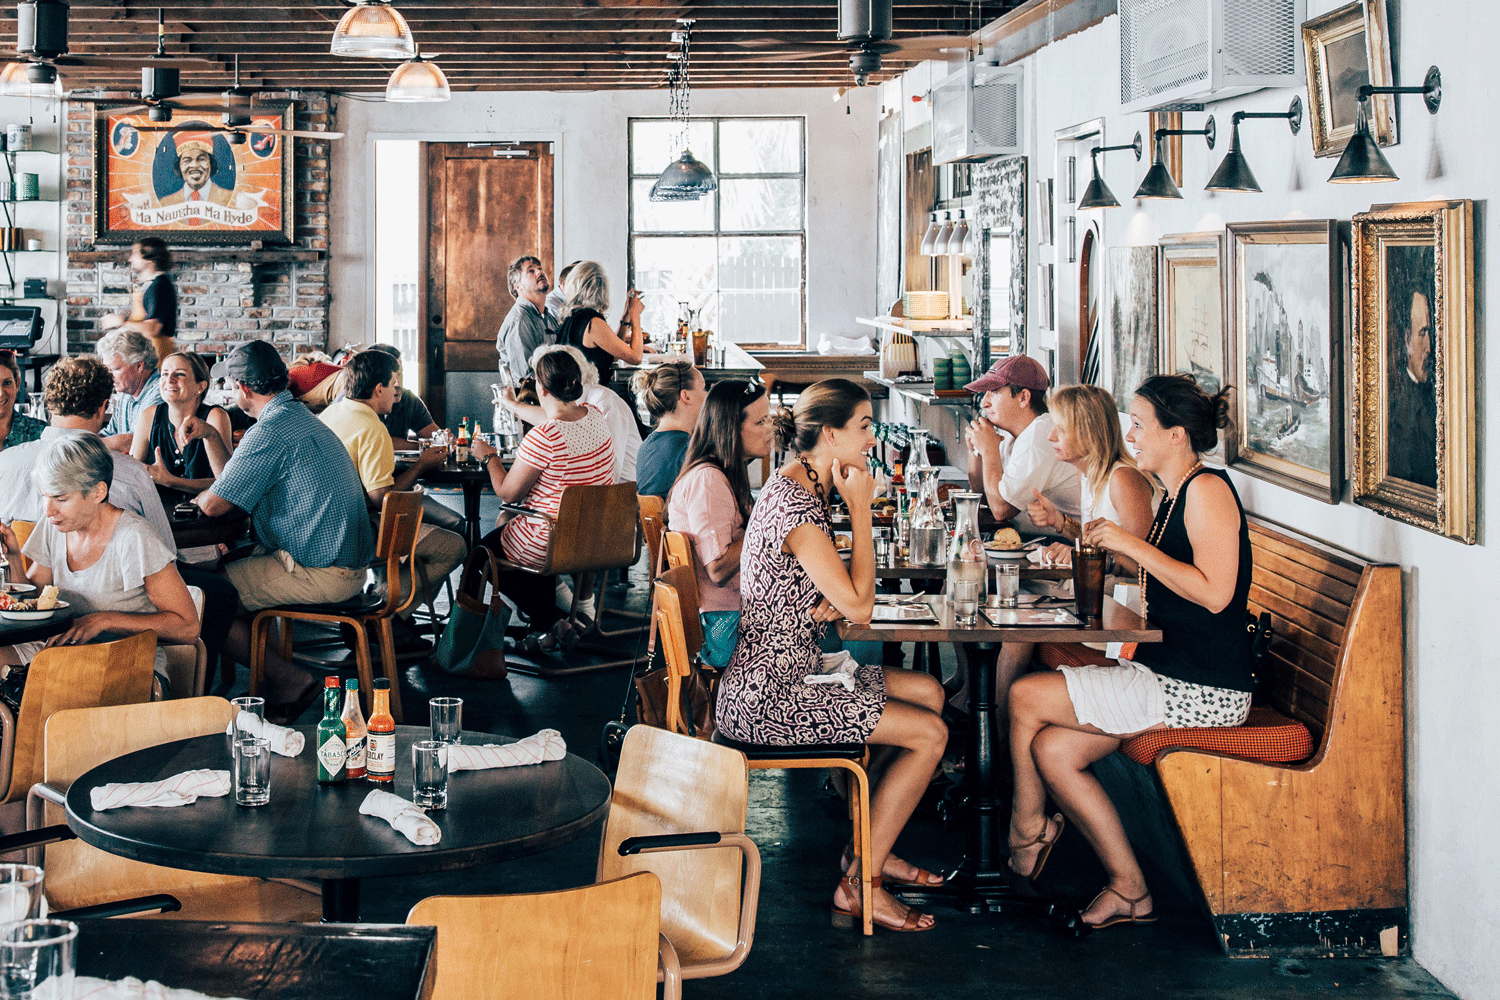 Fried food and good company: Leon’s Oyster Shop